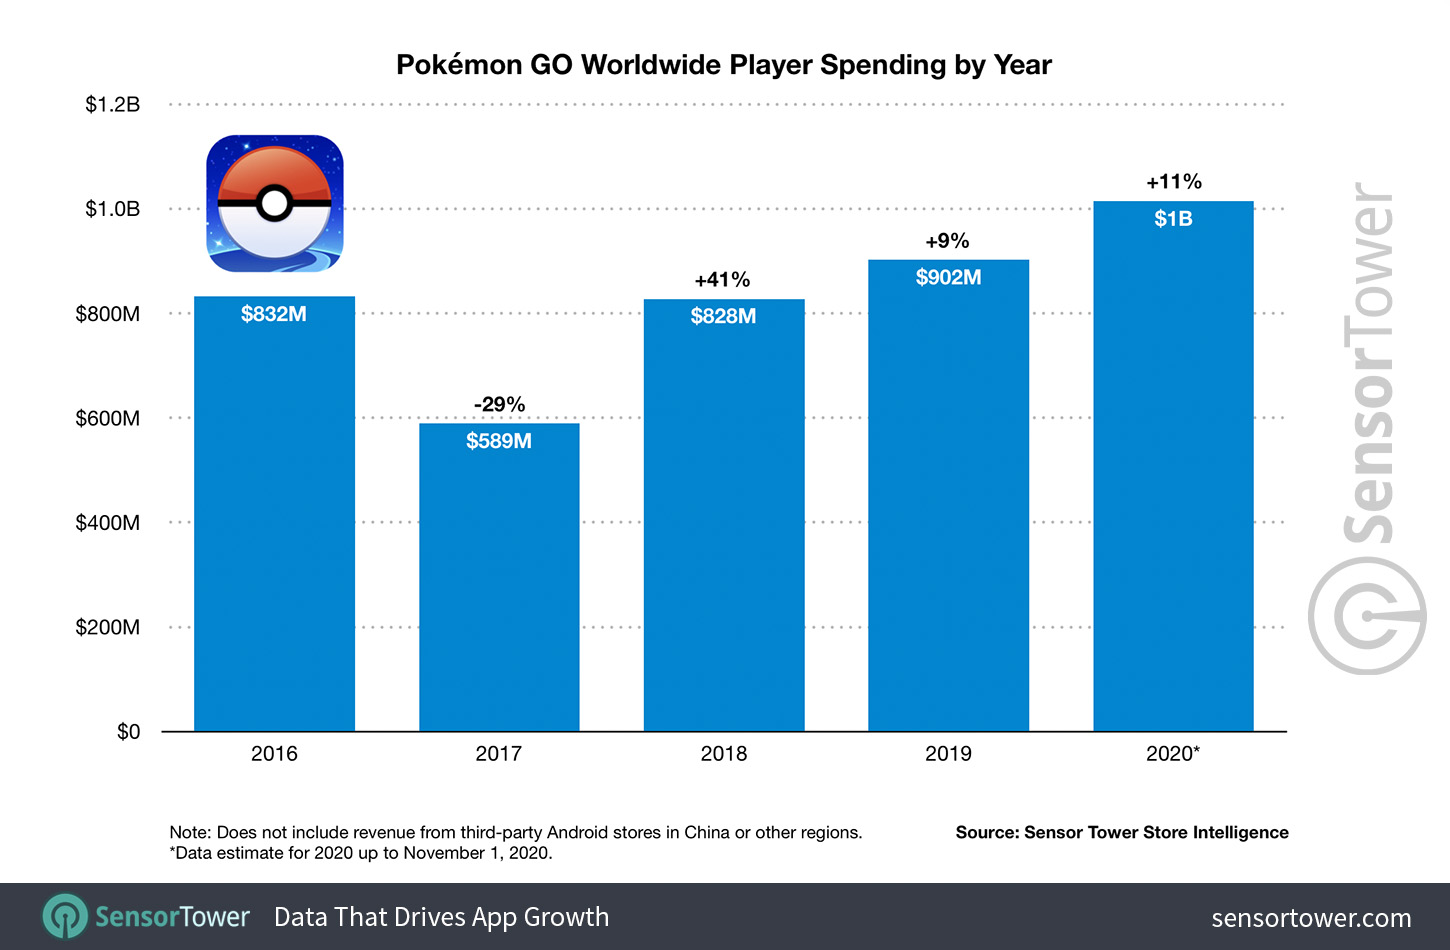 Pokémon GO Worldwide User Spending By Year For 2016 to 2020